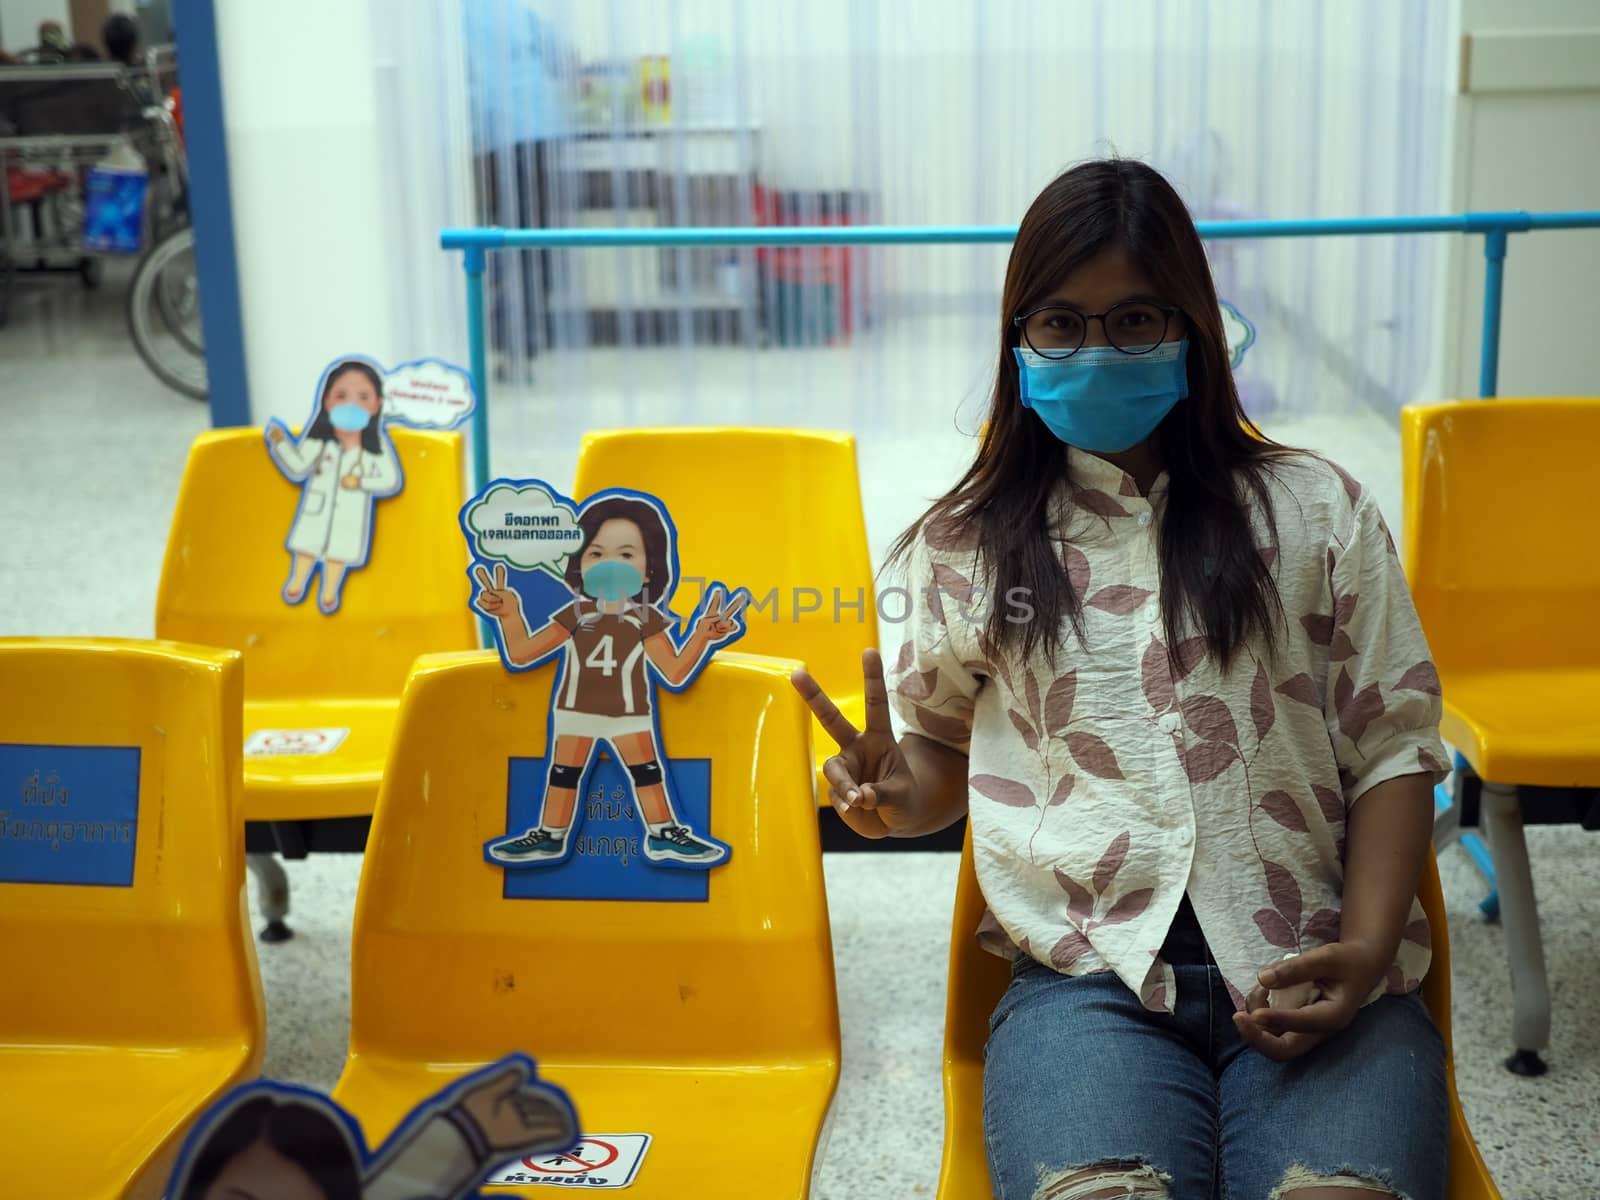 Asian women wear protective masks and sit on chairs to maintain by Unimages2527